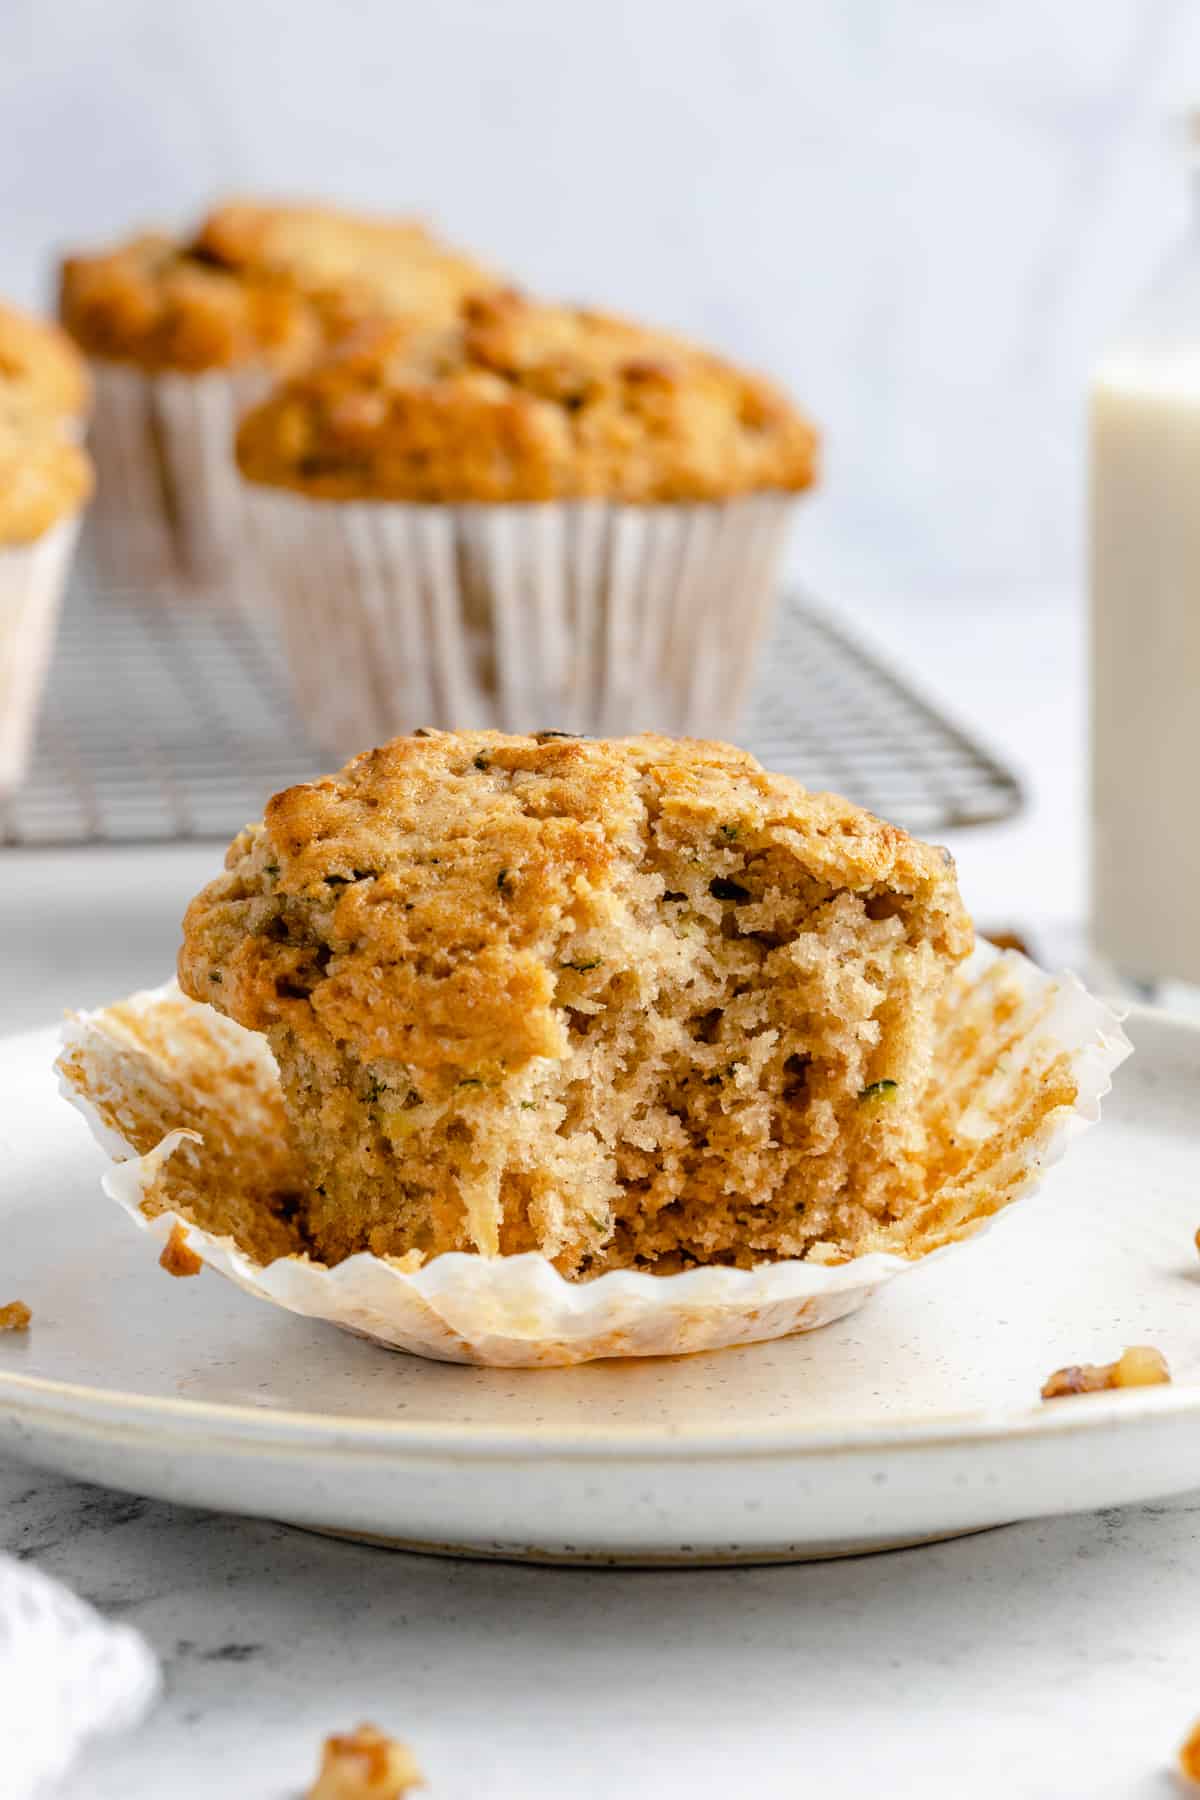 Zucchini muffin with a bite taken out of it.